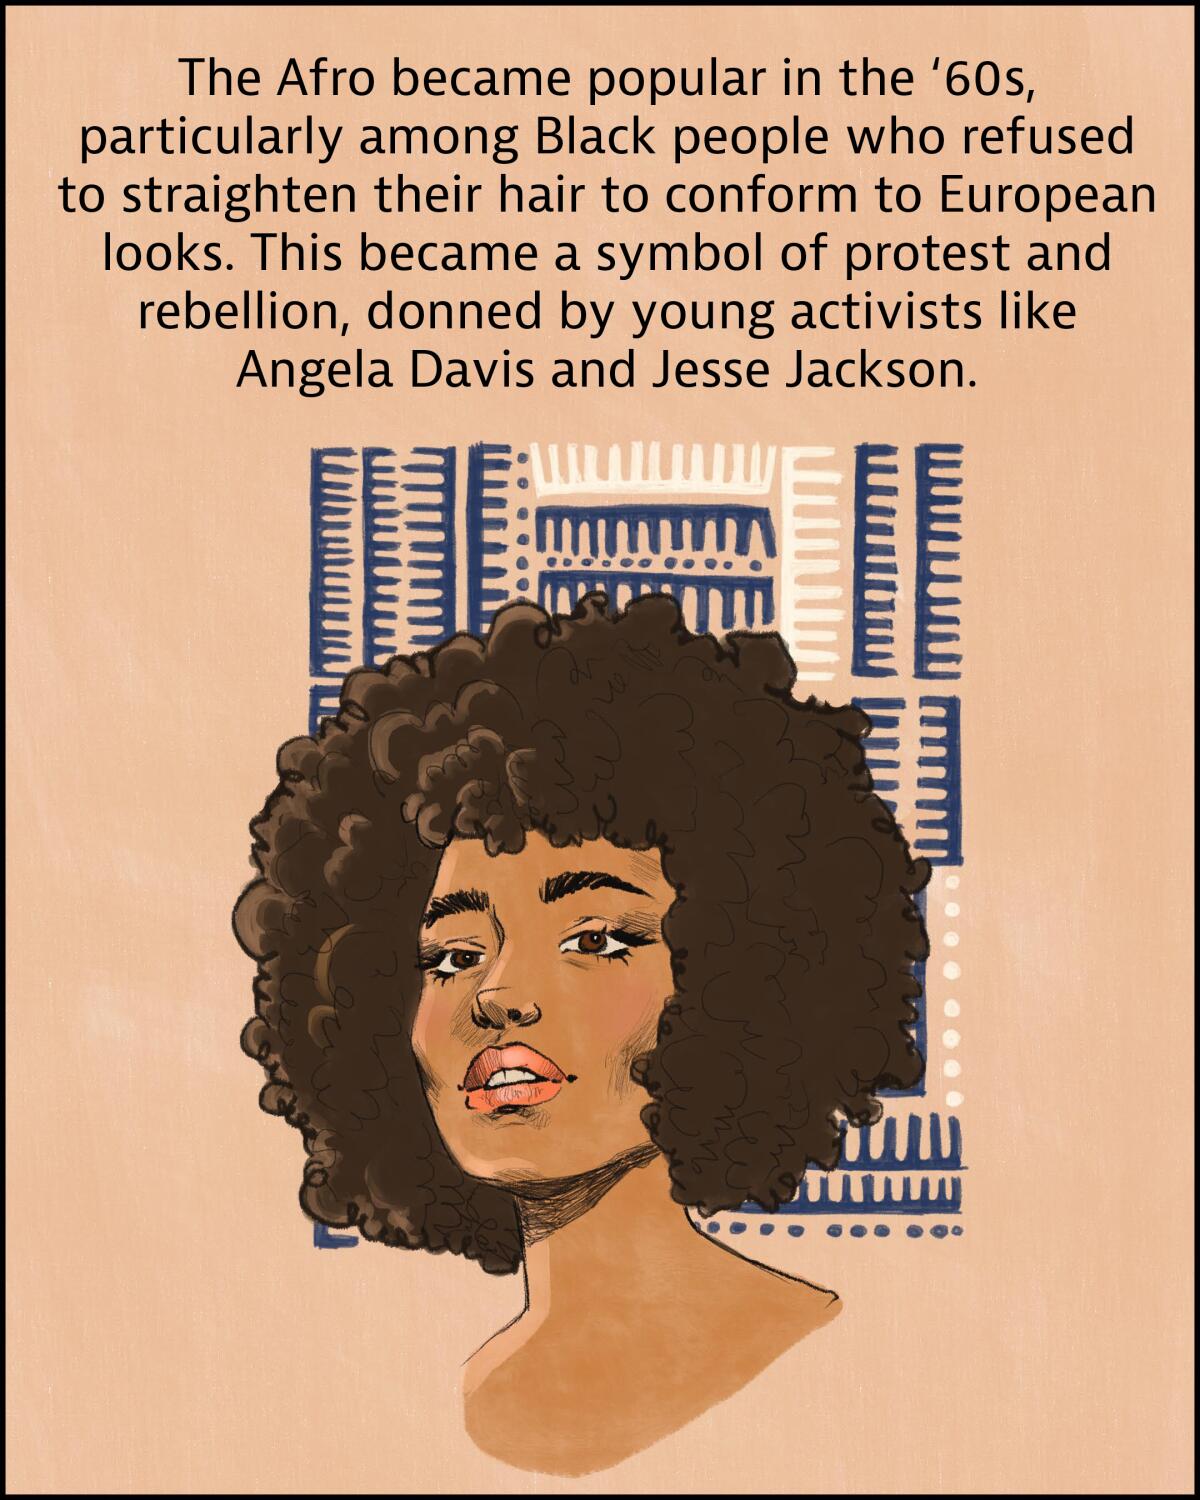 In the '60s Afros became the symbol of protest and rebellion. Donned by young activists like Angela Davis and Jesse Jackson.